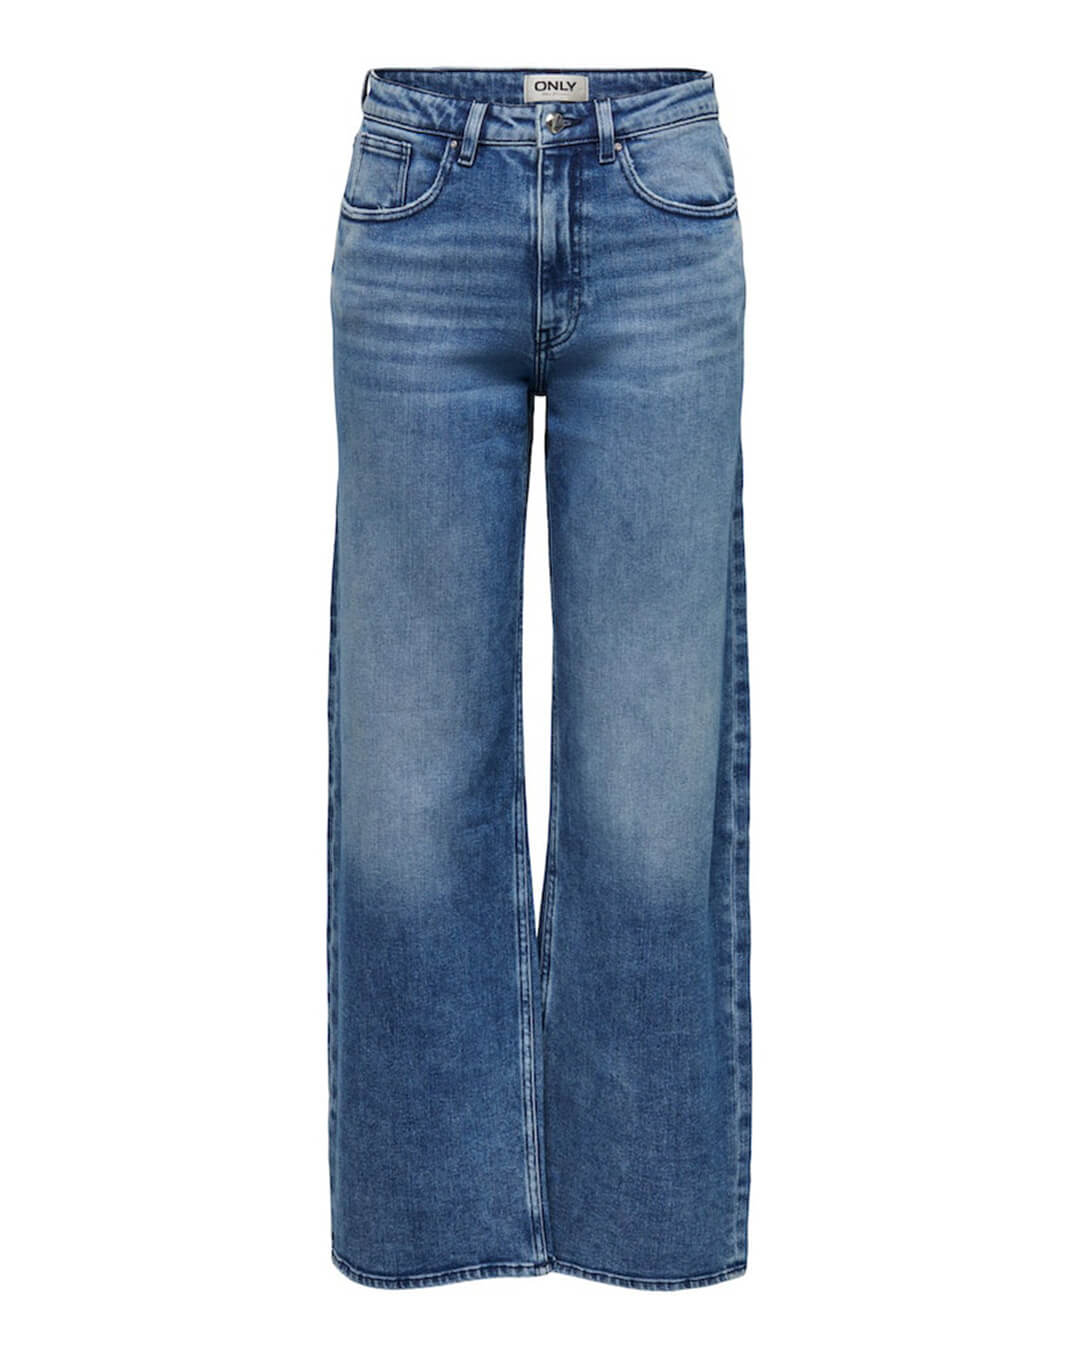 Only Jeans Only High Waist Blue Denim Wide Jeans